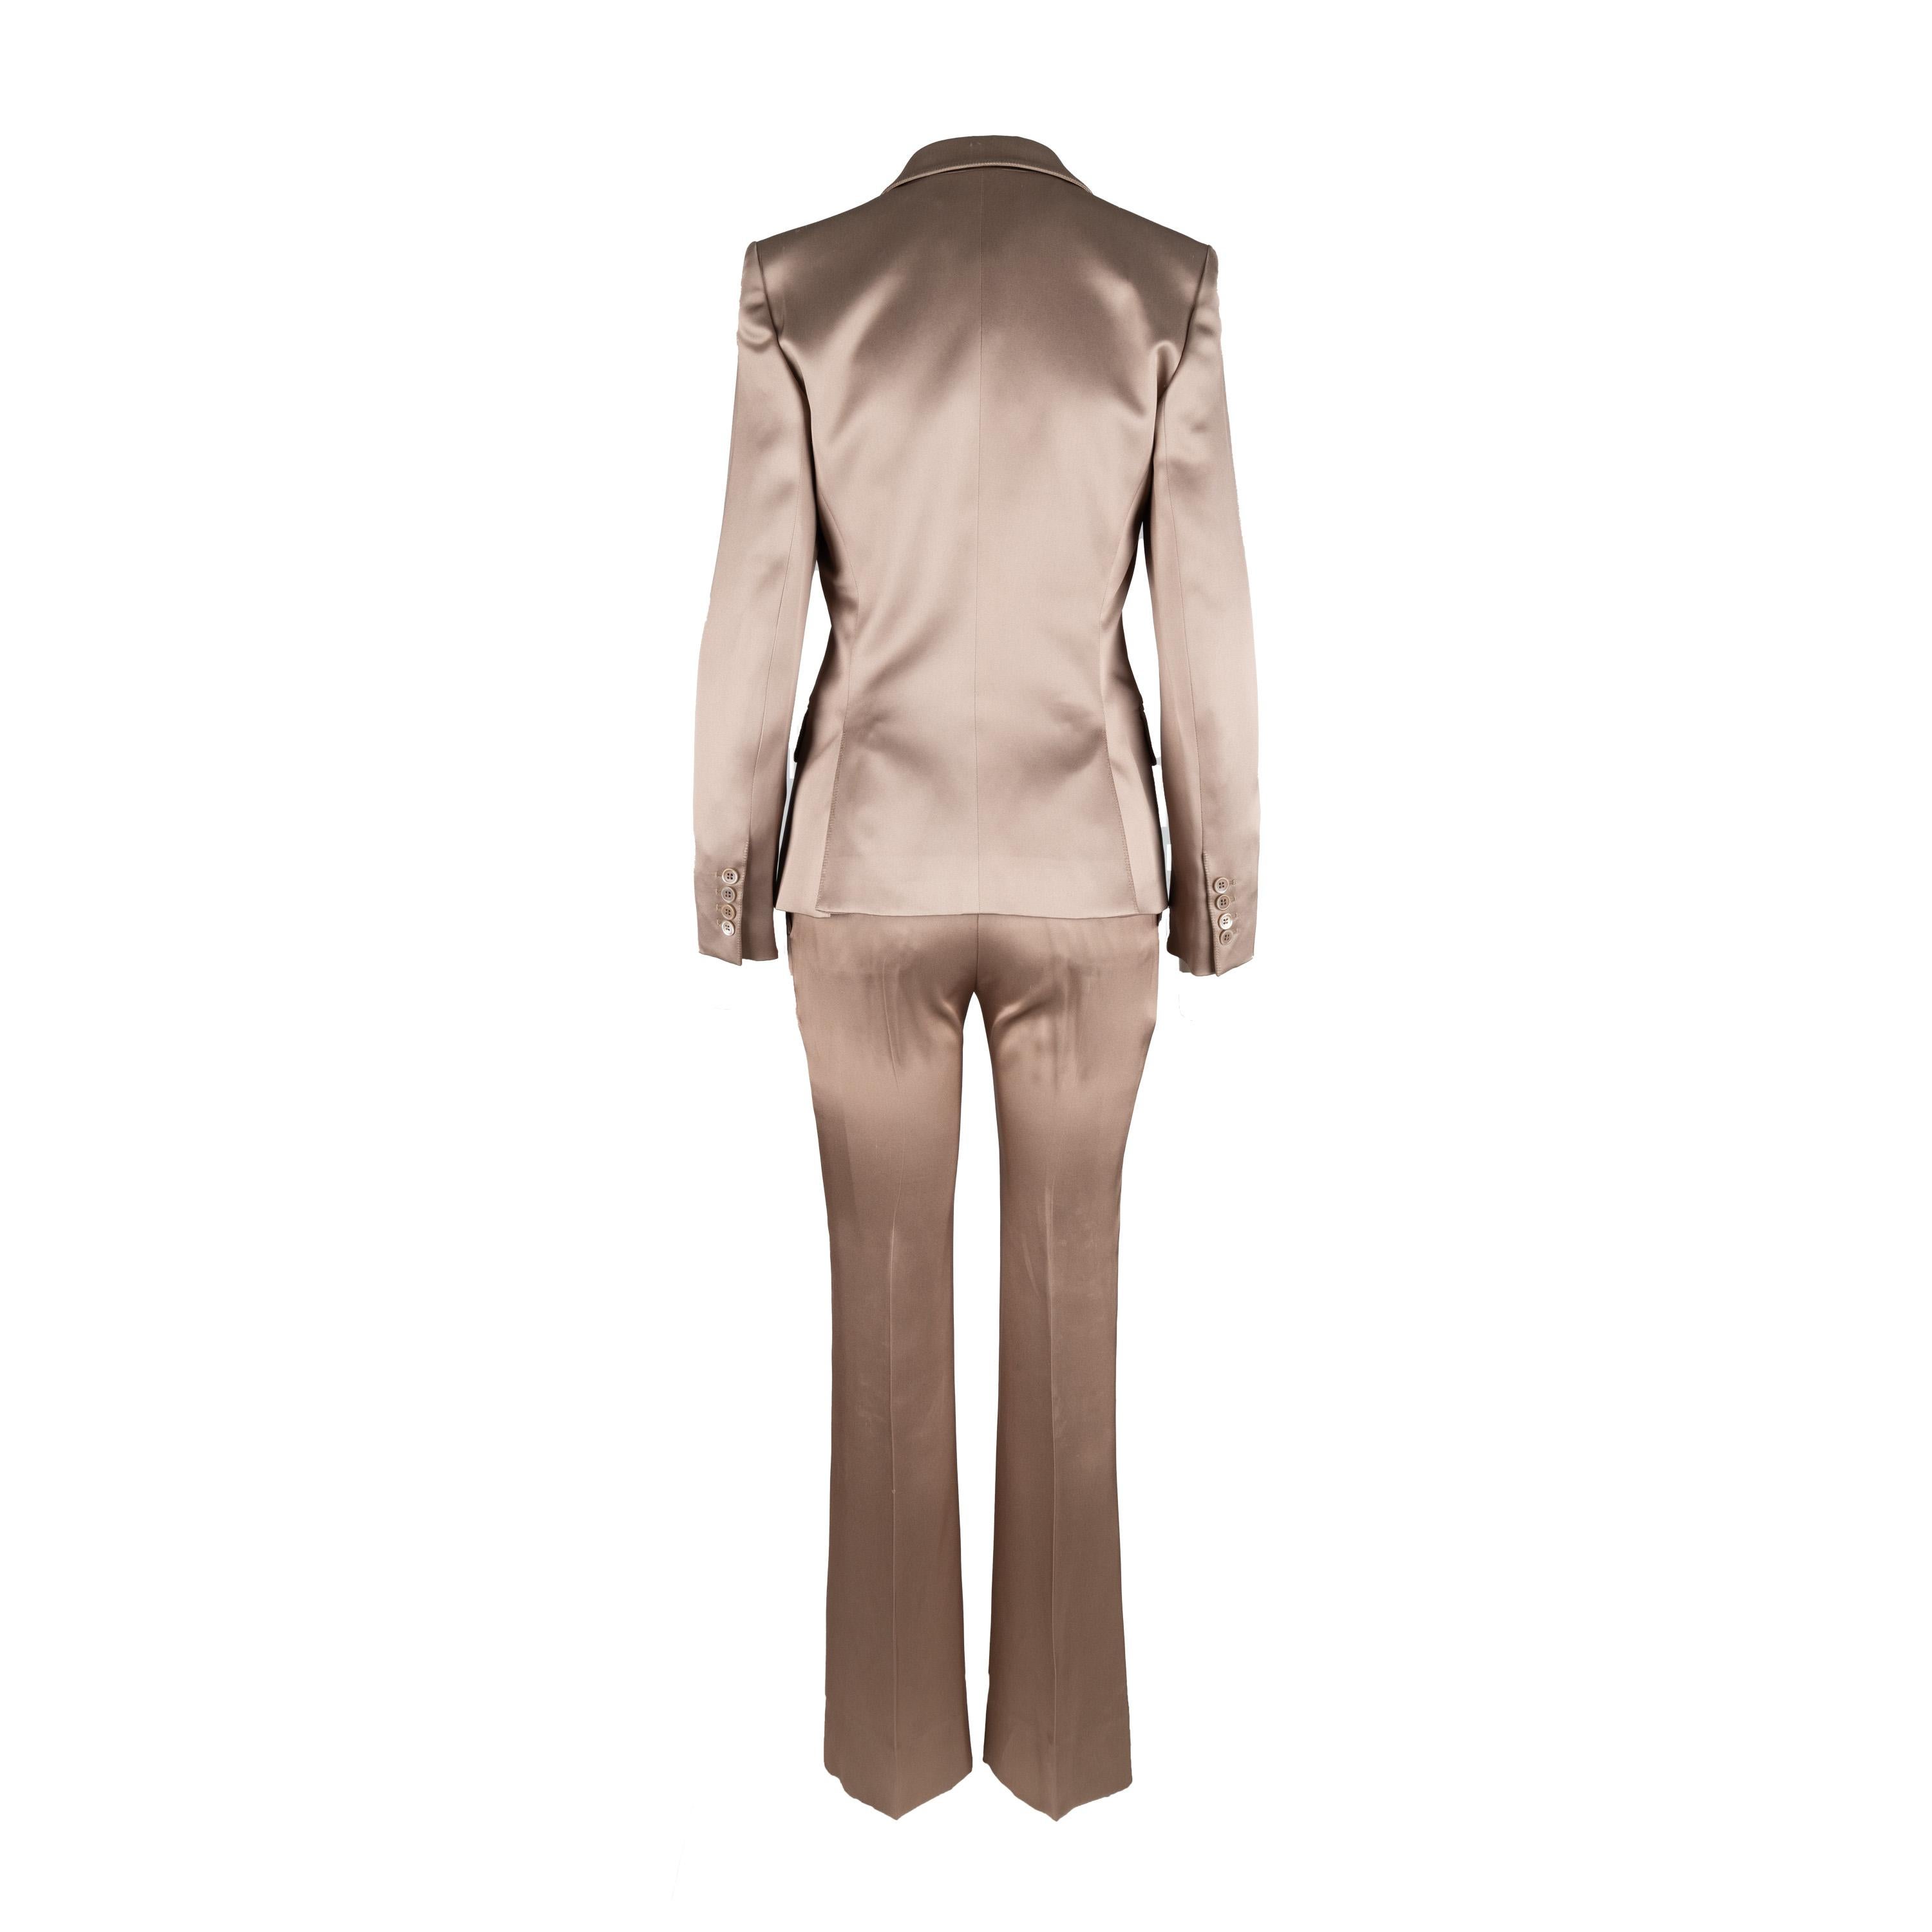 This Yves Saint Laurent Silk Suit, designed by Tom Ford circa 2000s, is expertly crafted from 100% silk in a beige hue with a subtle sheen. Showcasing a signature spread lapel collar, one front button, two flap pockets and a chest pocket with an